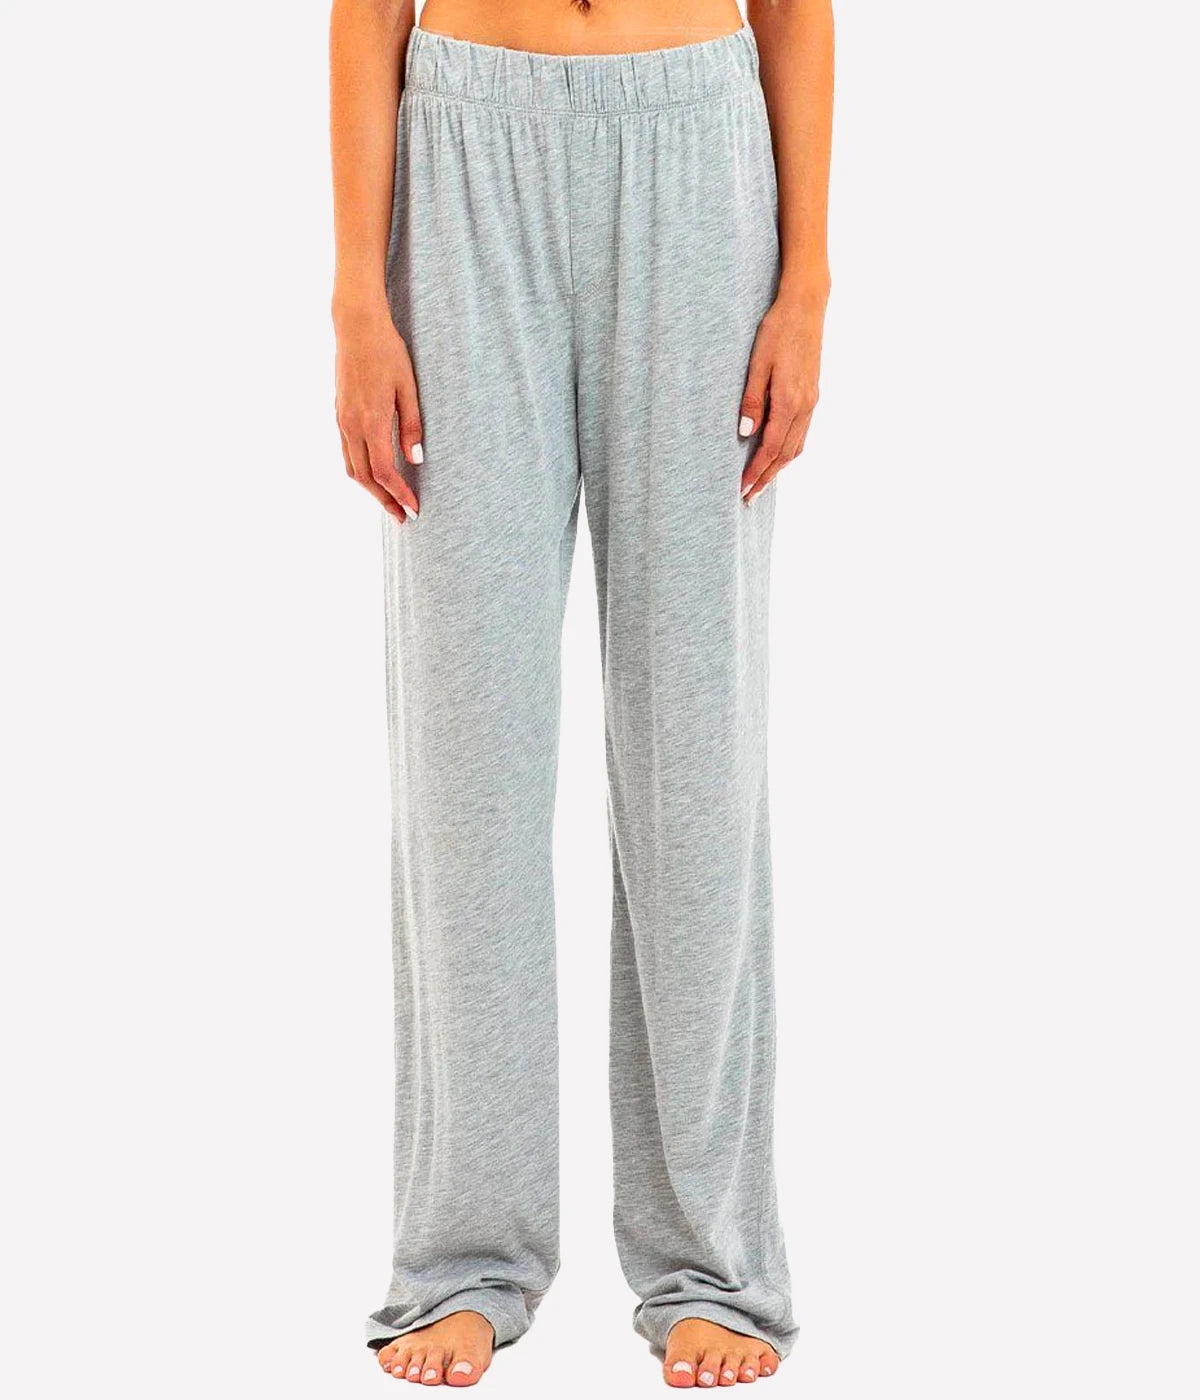 Lounge Pant in Heather Grey